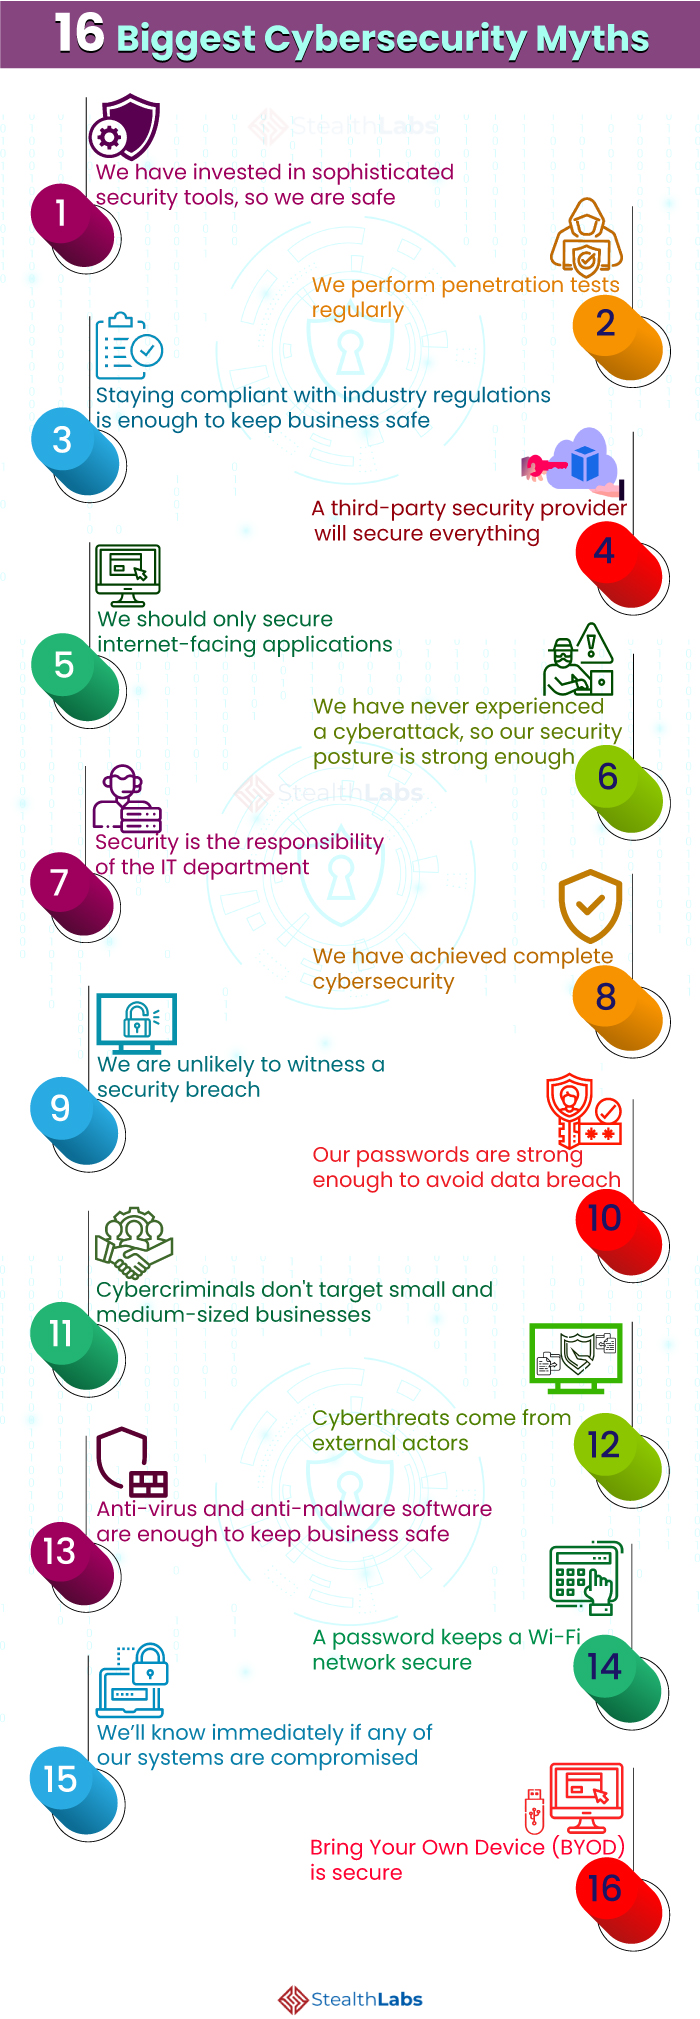 16 Biggest Cybersecurity Myths and Misconceptions